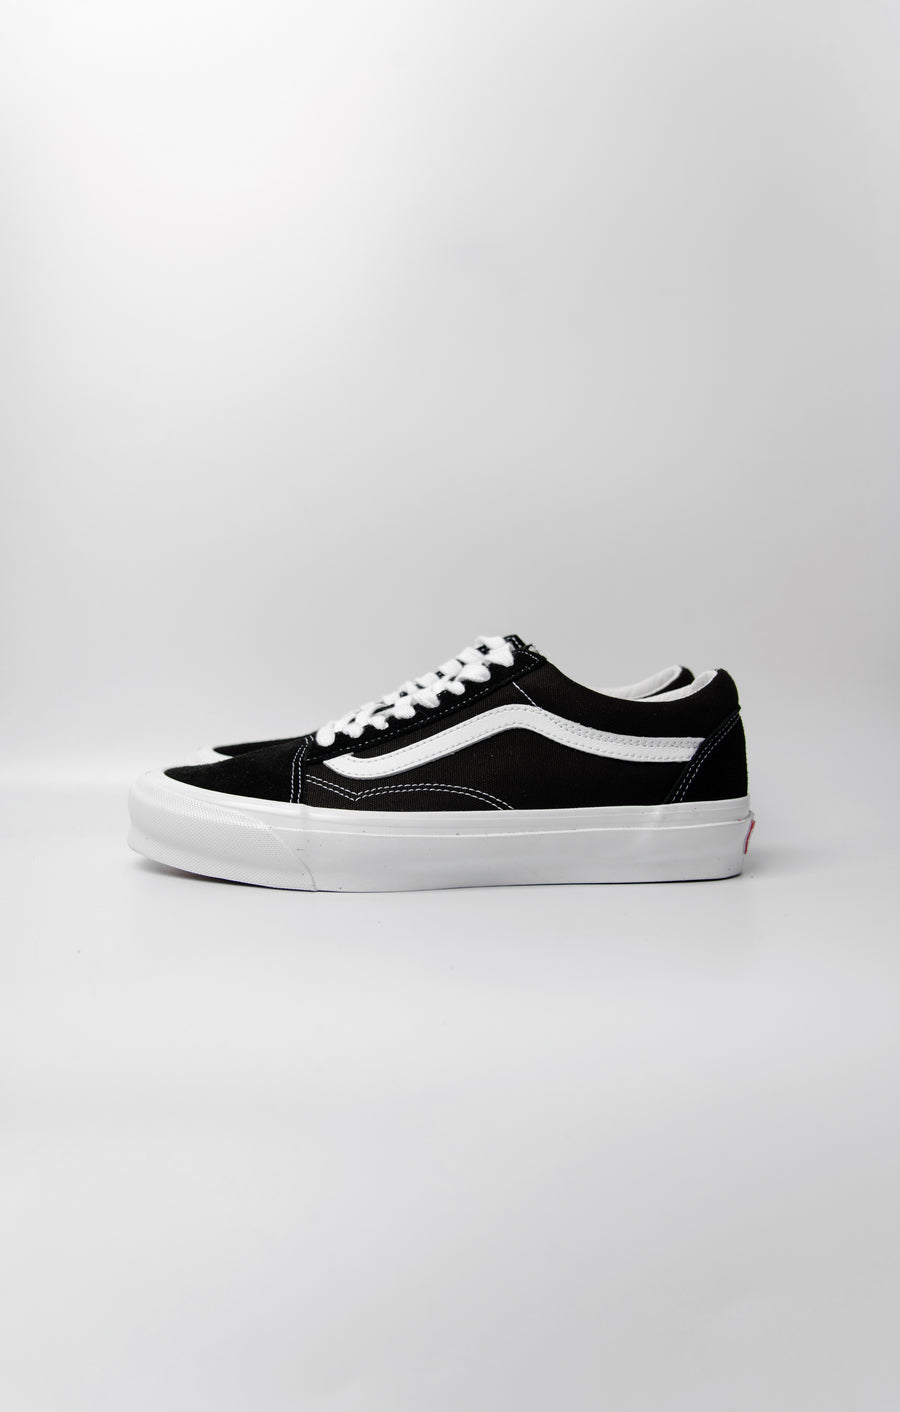 Incubus Helt tør Reception Old Skool LX Suede Black/White VN0A4P3XOIU – NOMAD